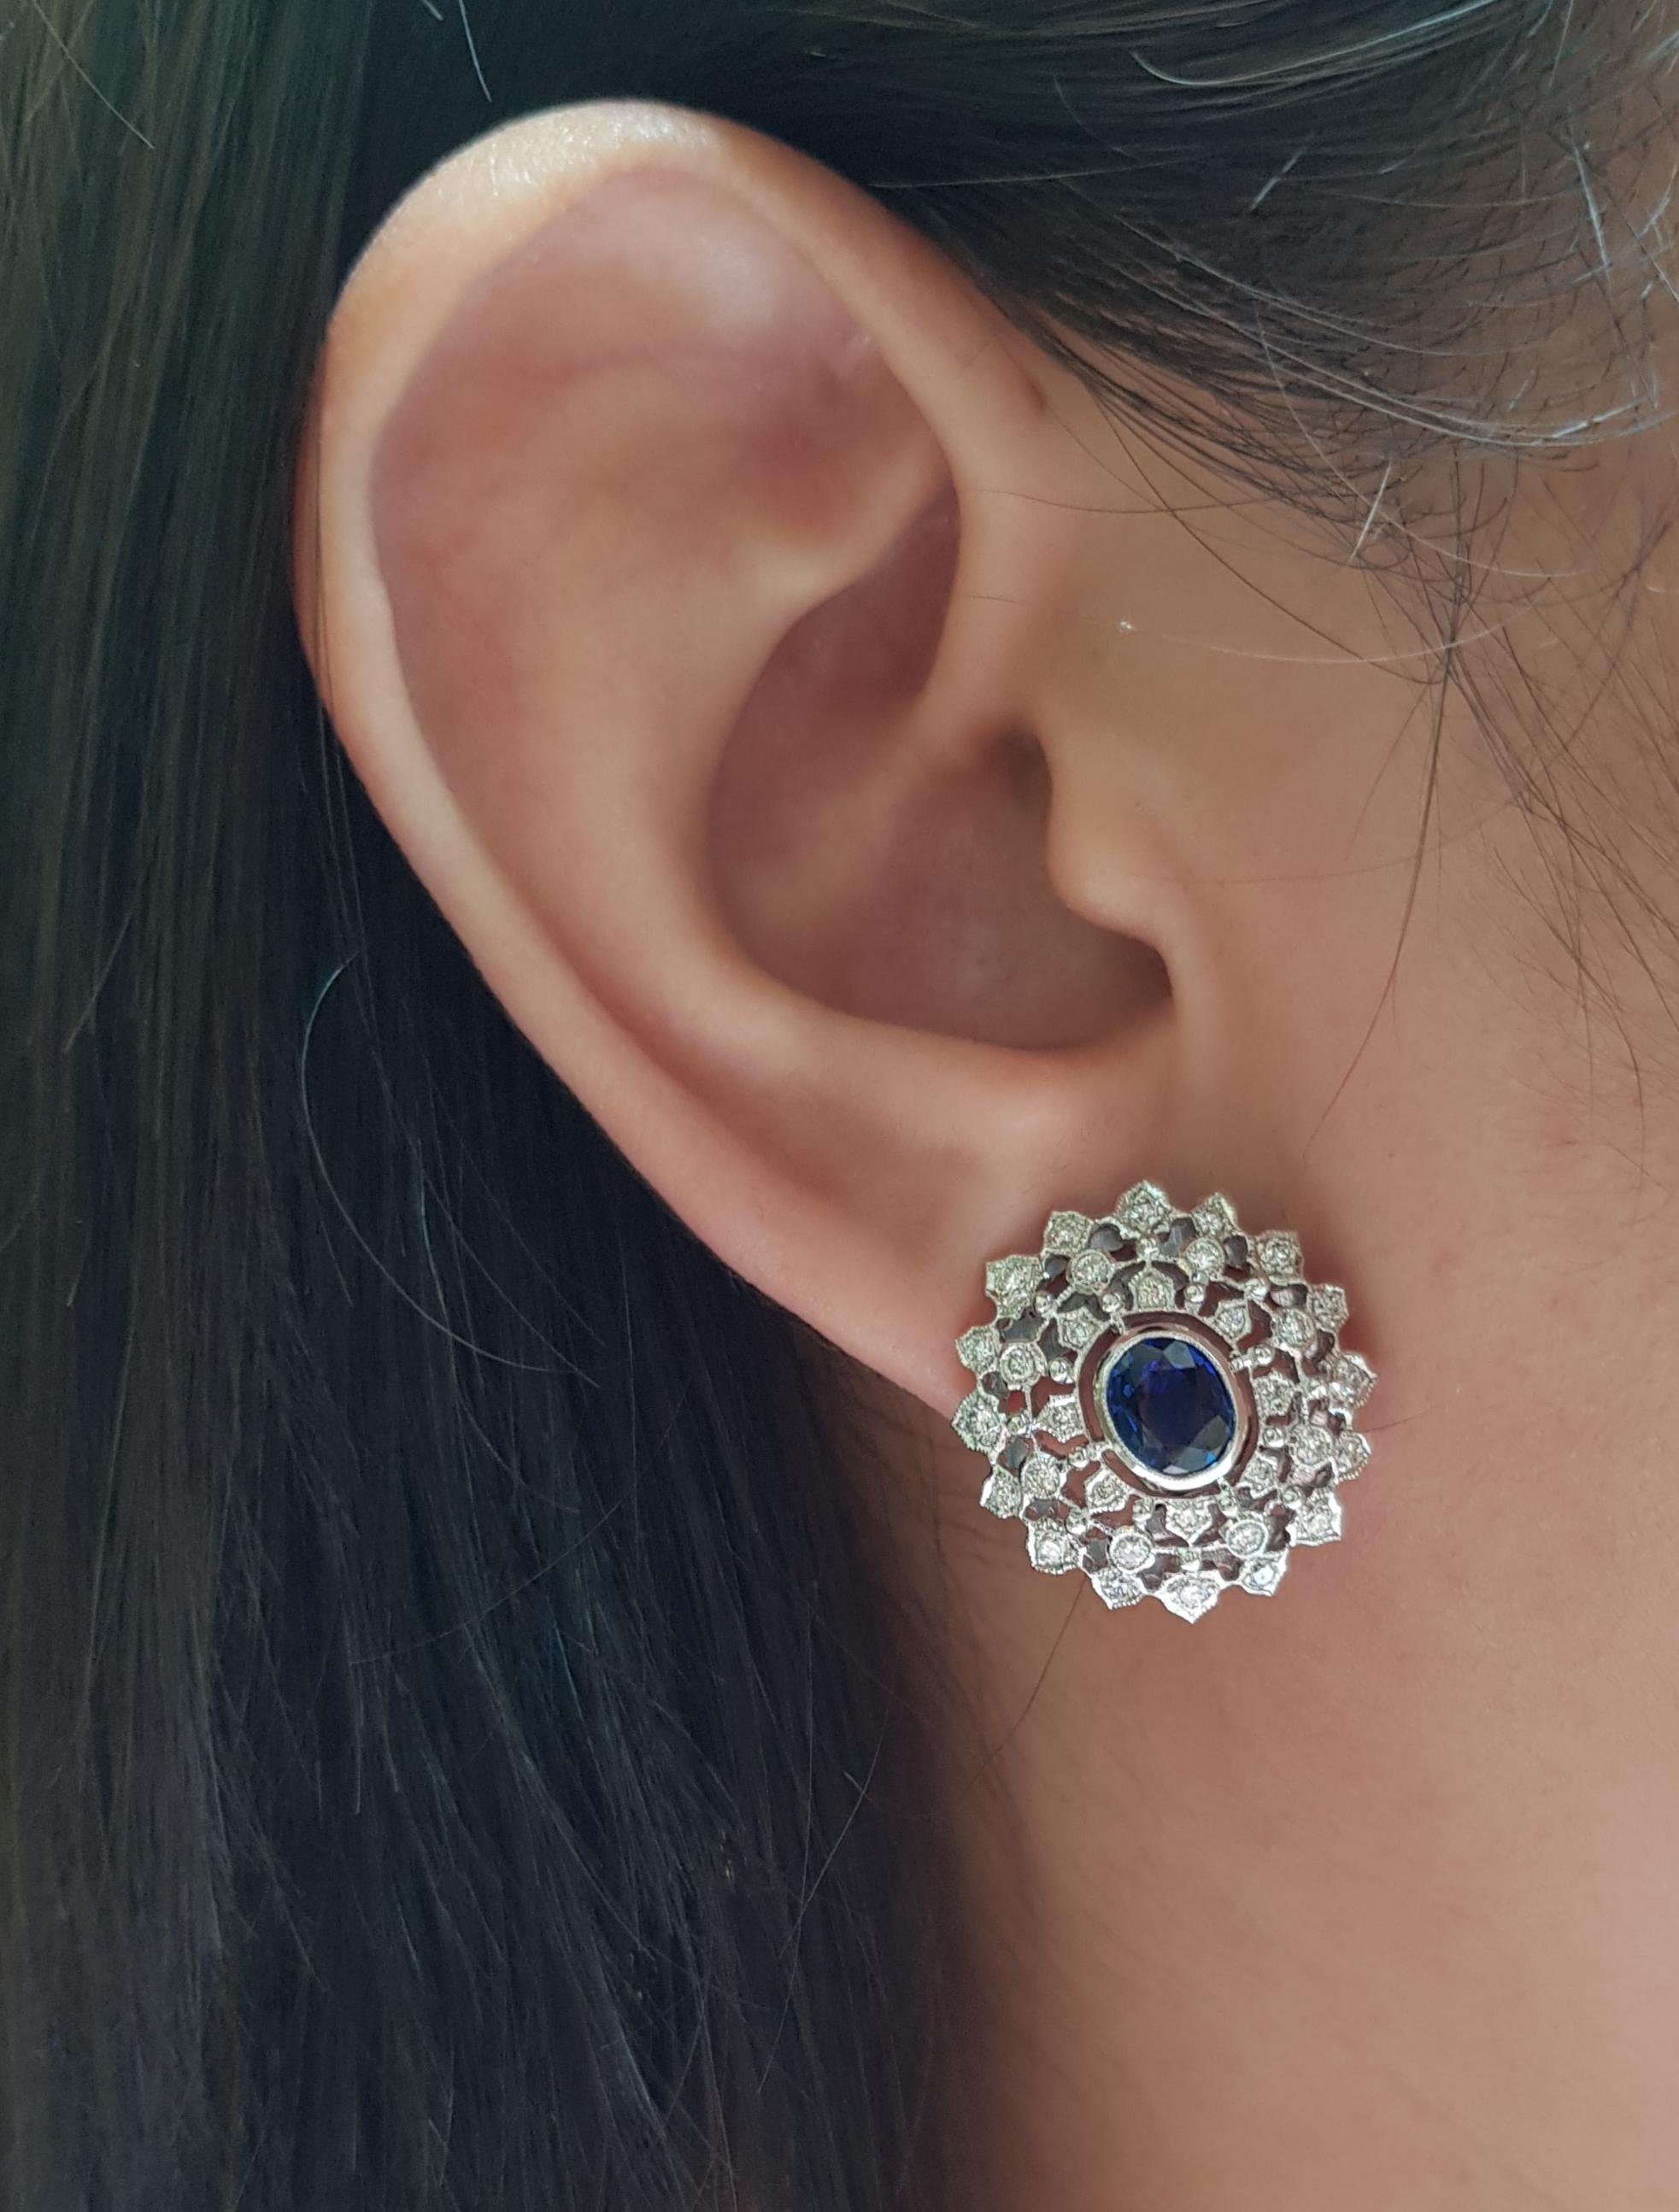 Blue Sapphire 2.39 carats with Diamond 0.97 carat Earrings set in 18 Karat White Gold Settings

Width:  2.0 cm 
Length: 2.0 cm
Total Weight: 11.24 grams

